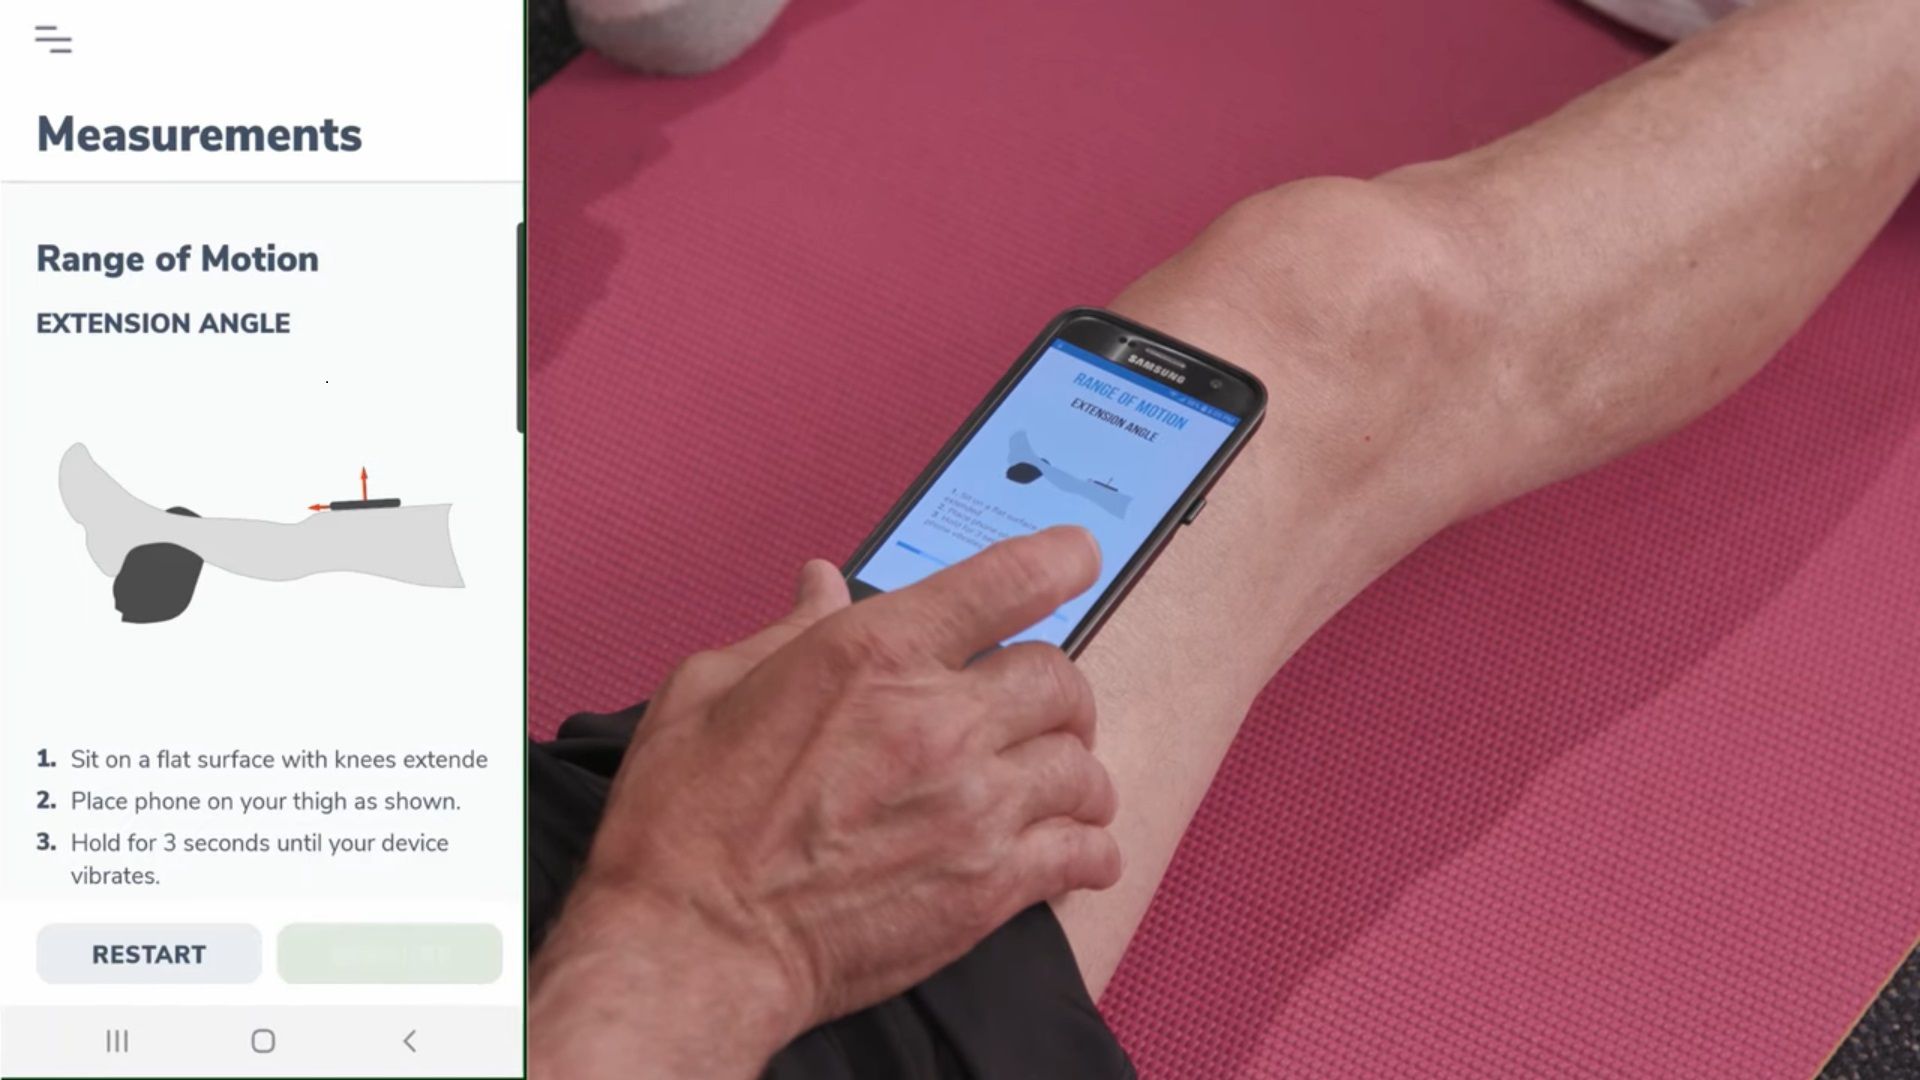 How To Measure Your Knee Range of Motion Using Curovate